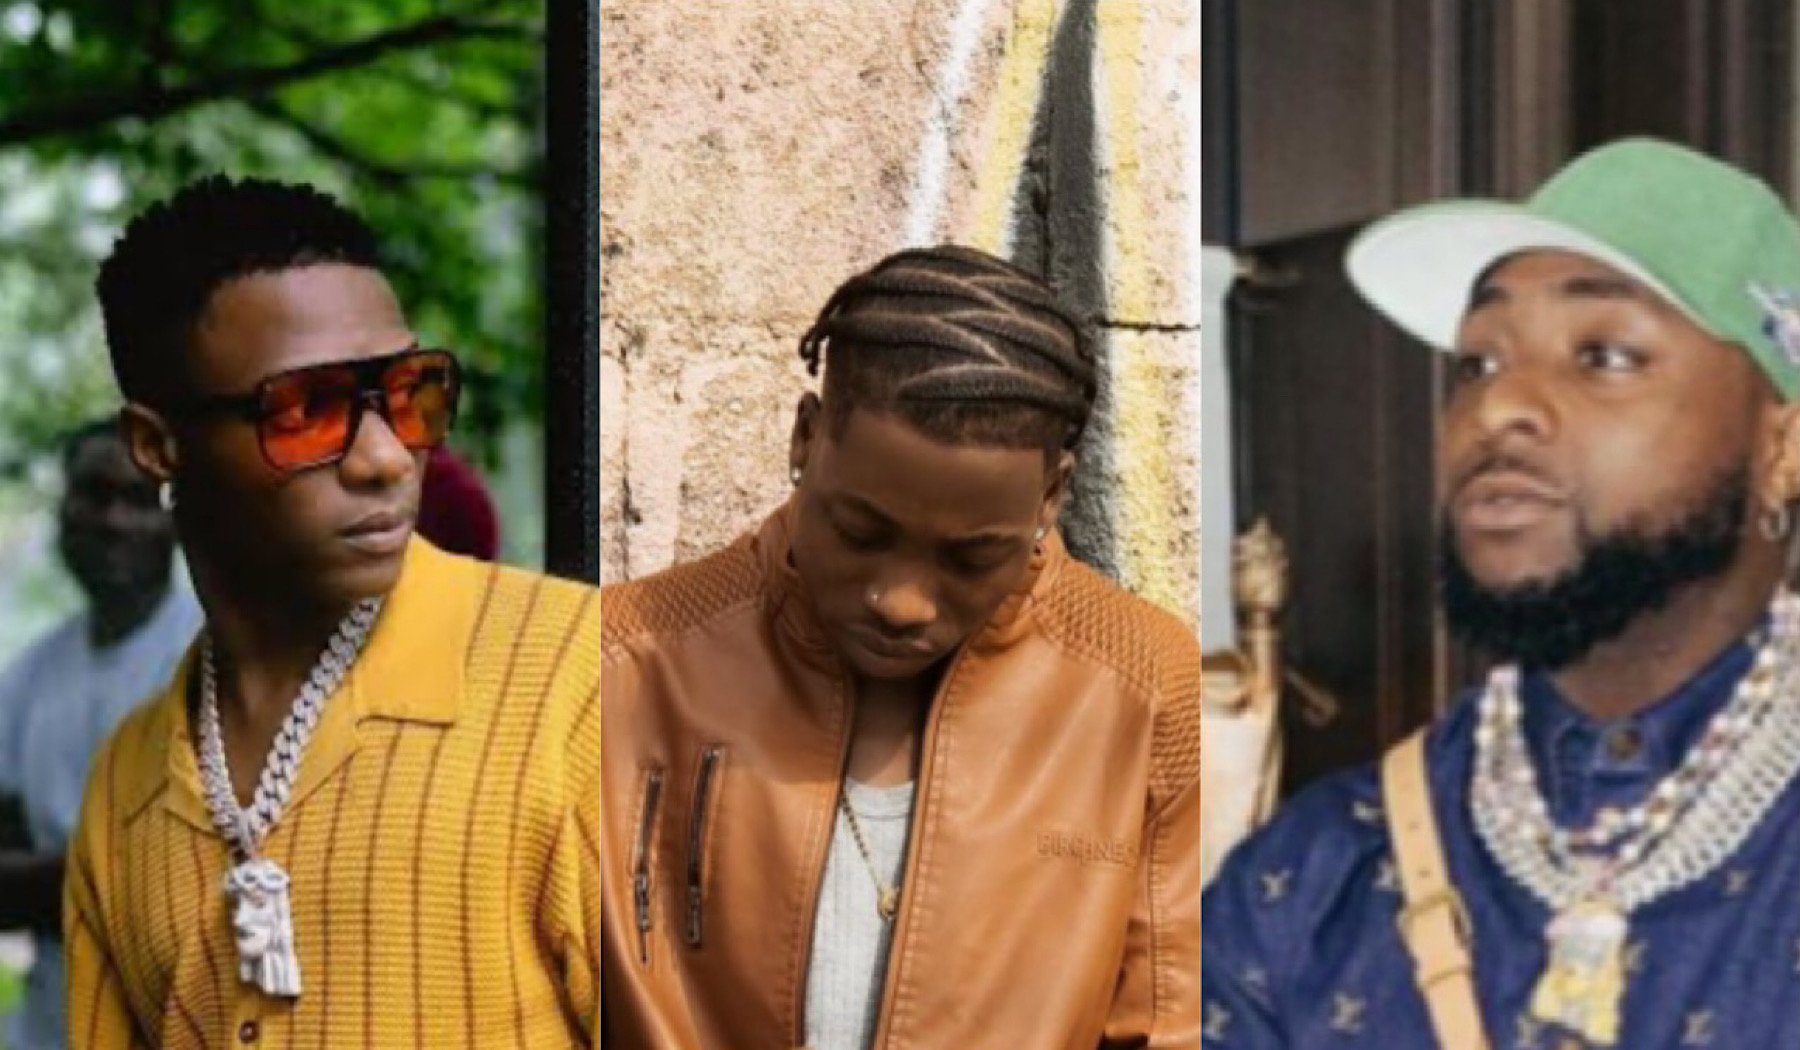 “If not for girl, Lilfrosh is meant to be in the identical stage with Wizkid” Twitter character reveals